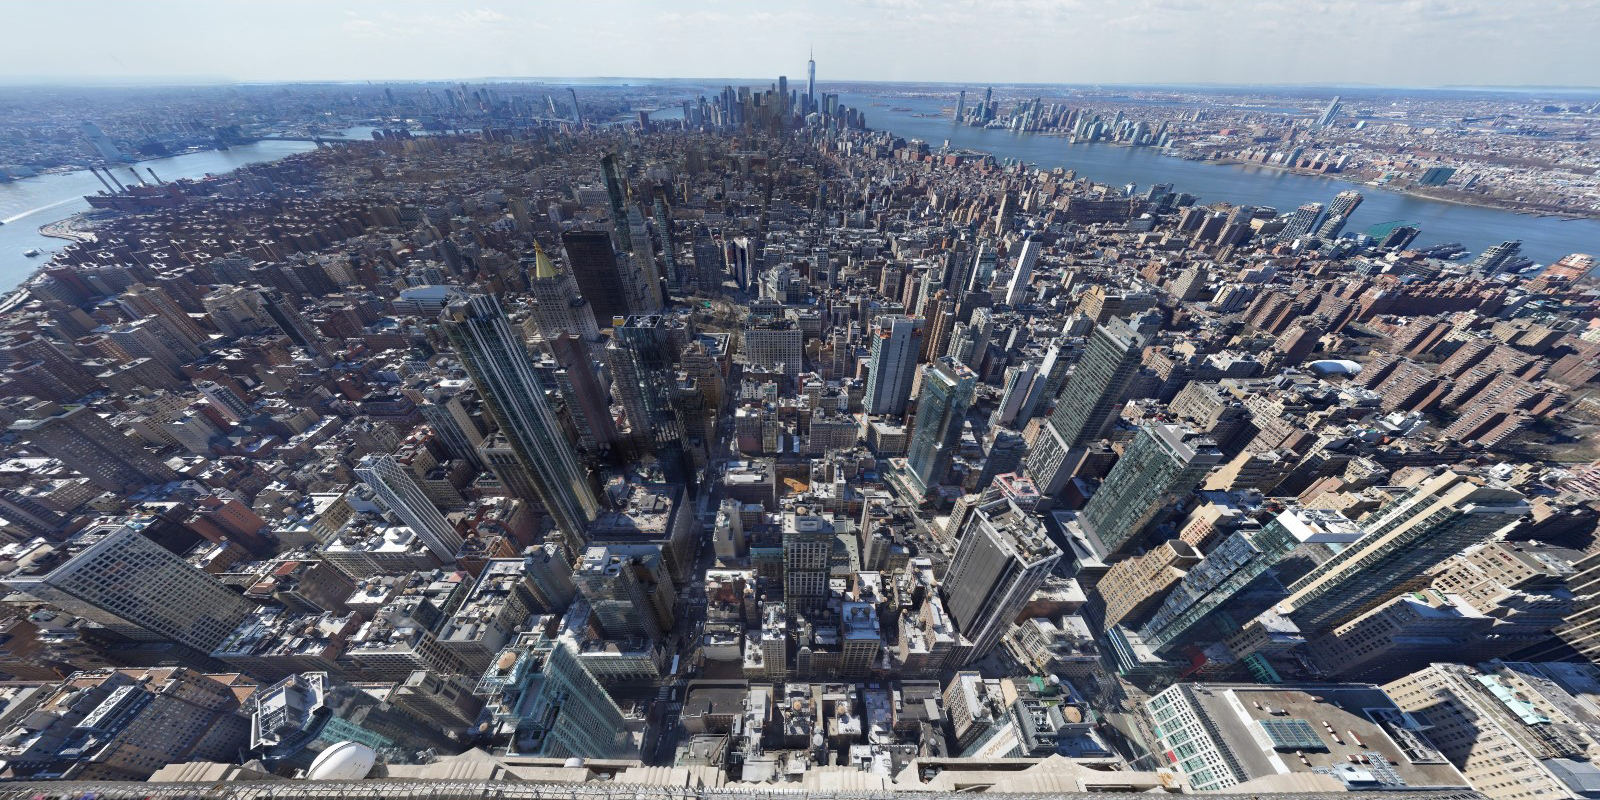 Is new york the largest city in the world (120) фото